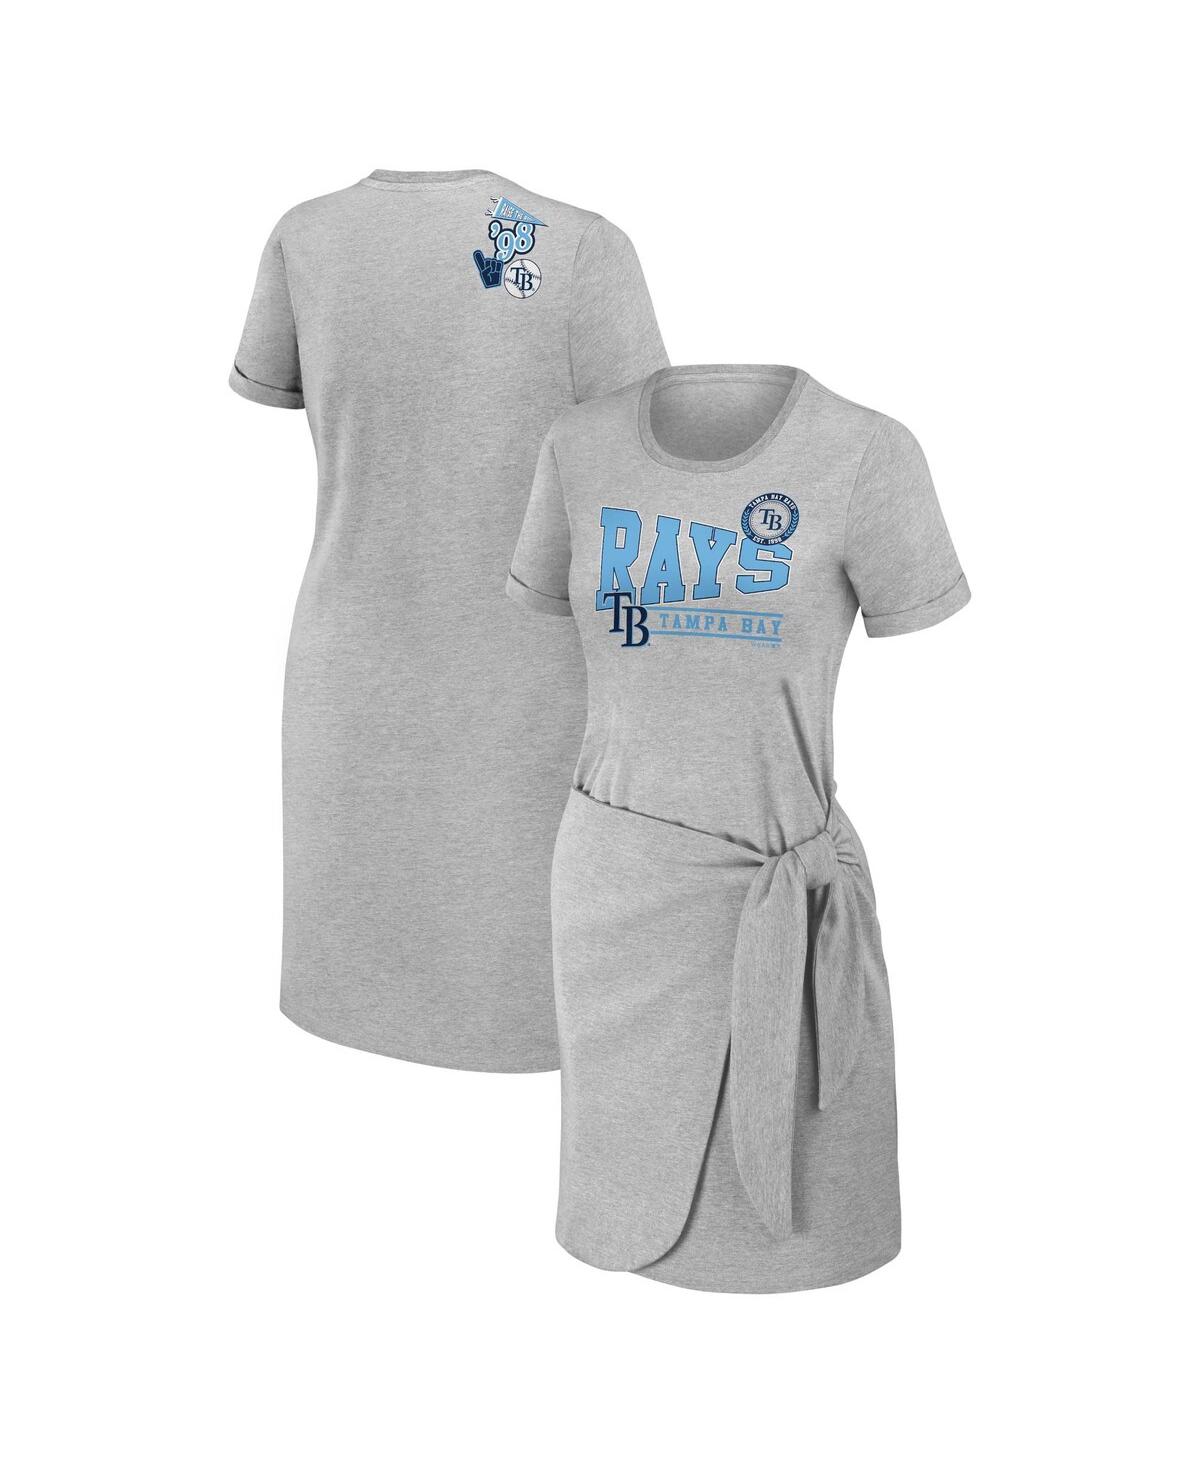 Shop Wear By Erin Andrews Women's  Heather Gray Tampa Bay Rays Knotted T-shirt Dress